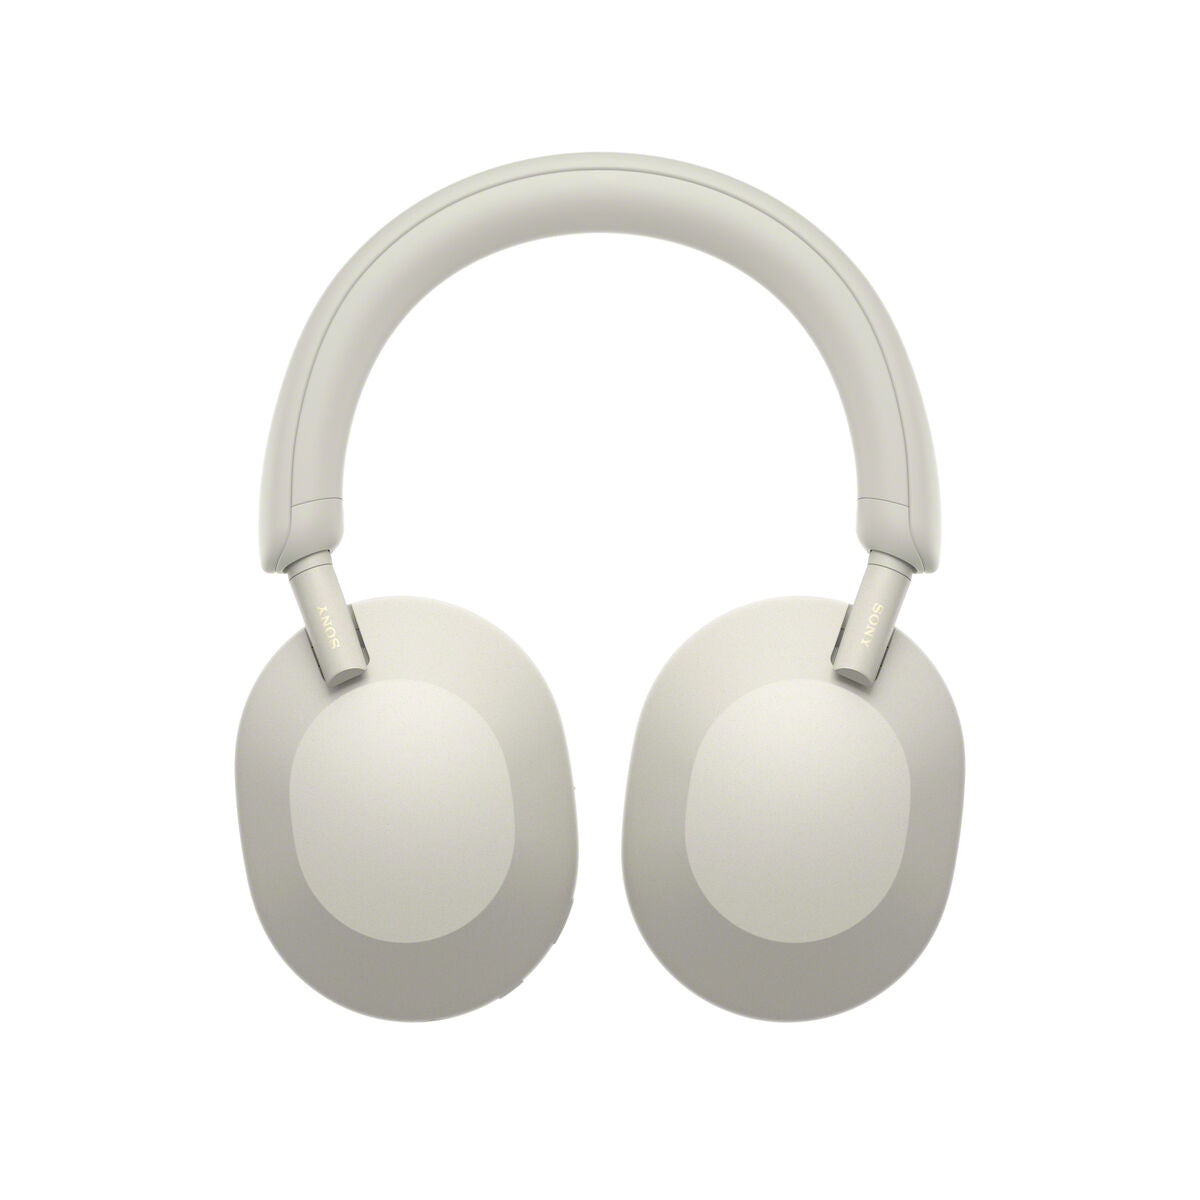 Headphones Sony WH-1000XM5 Silver, Sony, Electronics, Mobile communication and accessories, headphones-sony-wh-1000xm5-silver, Brand_Sony, category-reference-2609, category-reference-2642, category-reference-2847, category-reference-t-19653, category-reference-t-21312, category-reference-t-4036, category-reference-t-4037, computers / peripherals, Condition_NEW, entertainment, music, office, Price_400 - 500, RiotNook